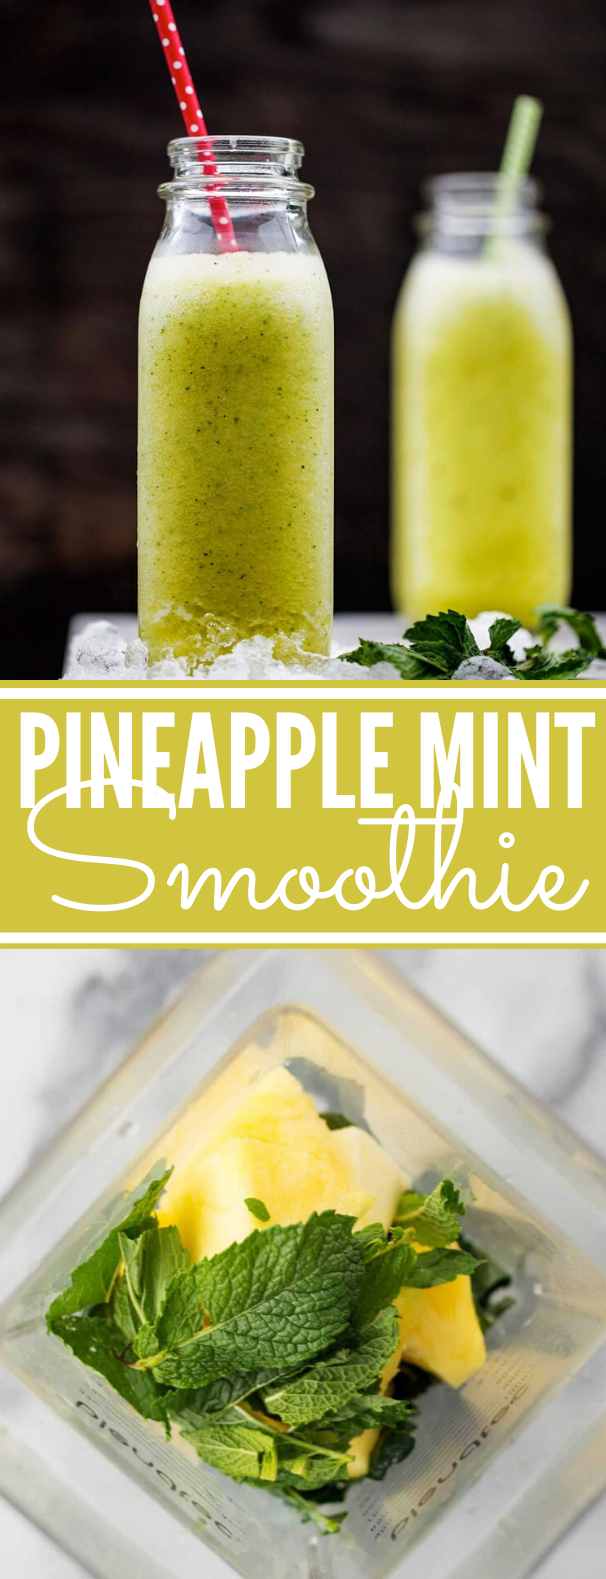 Pineapple Mint Smoothie #drink #healthy #smoothie #fruit #glutenfree